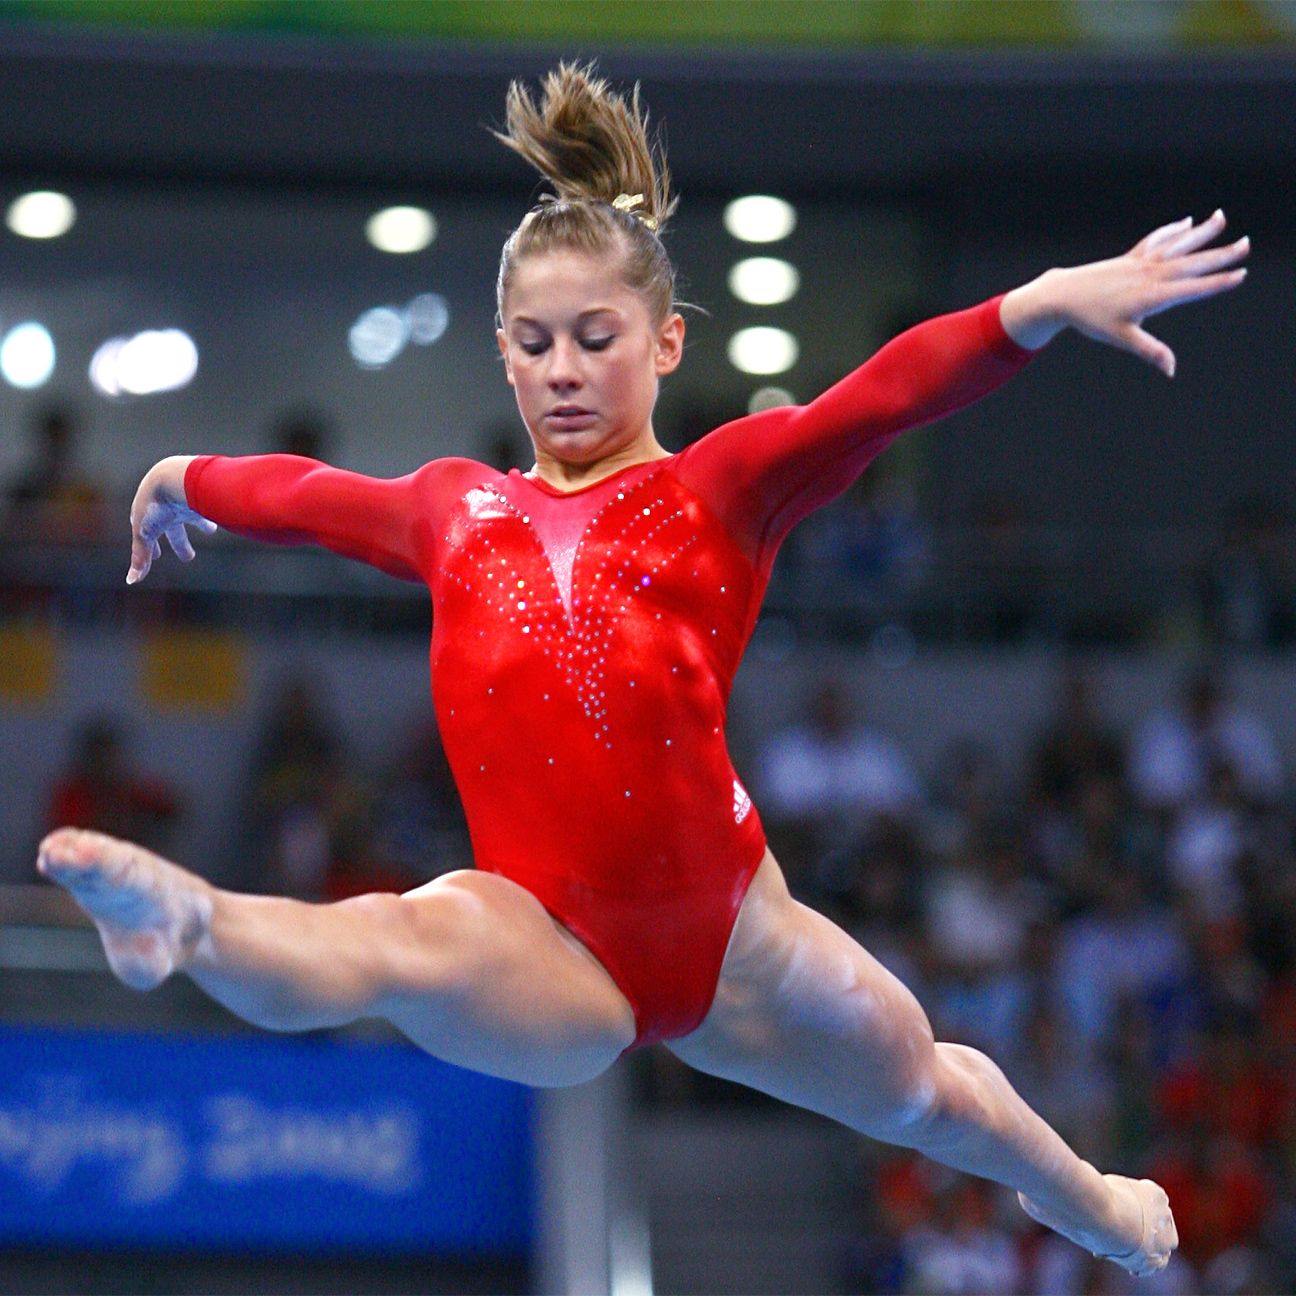 Gymnastics federation reduces Olympic team sizes to 4 from 5